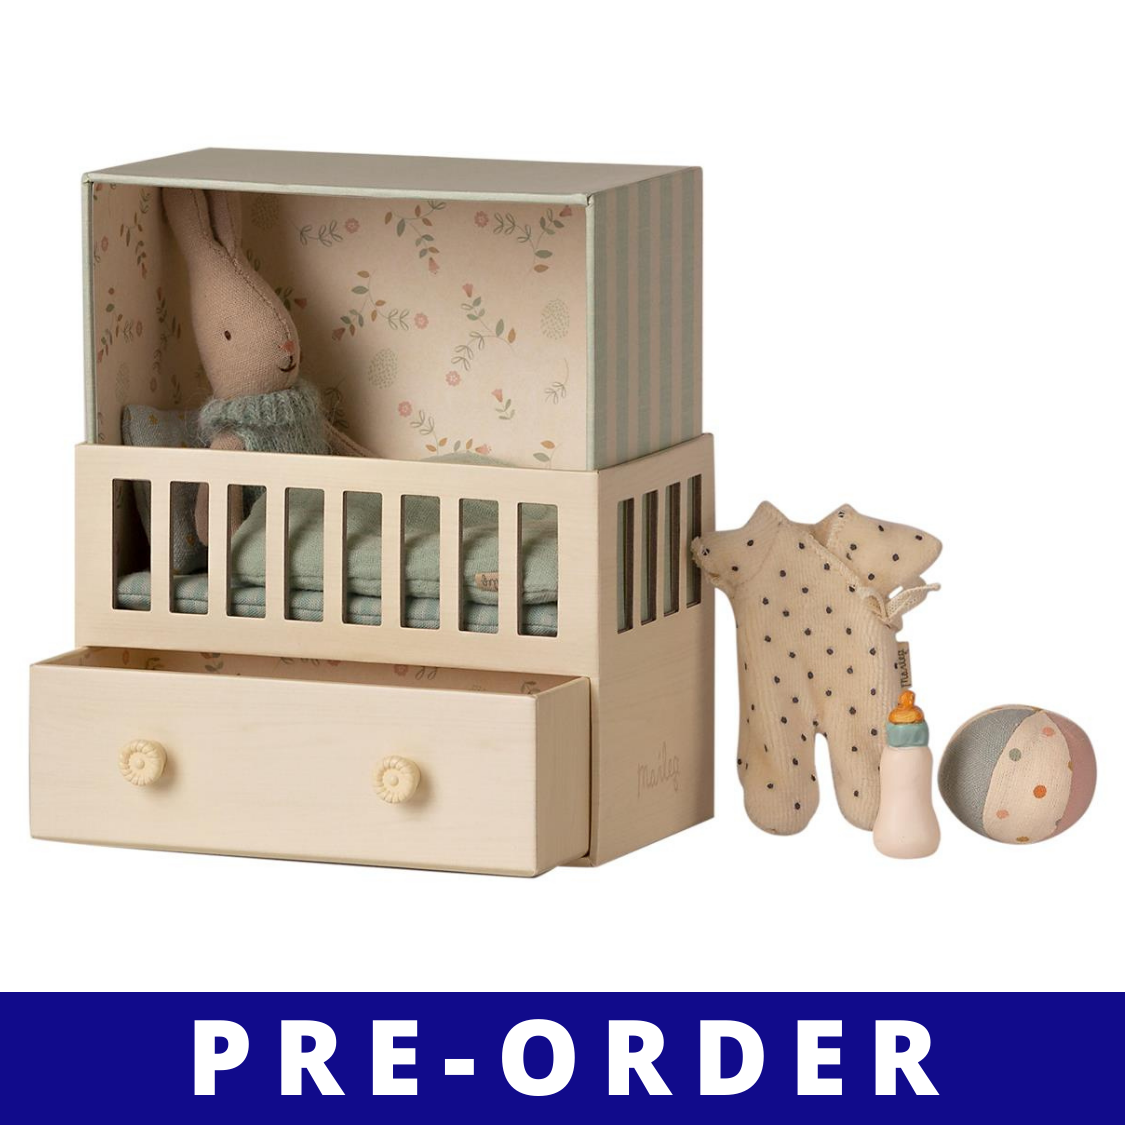 ** Preorder Only** Baby Room With Micro Rabbit (16-1021-01) Dollhouses & Accessories